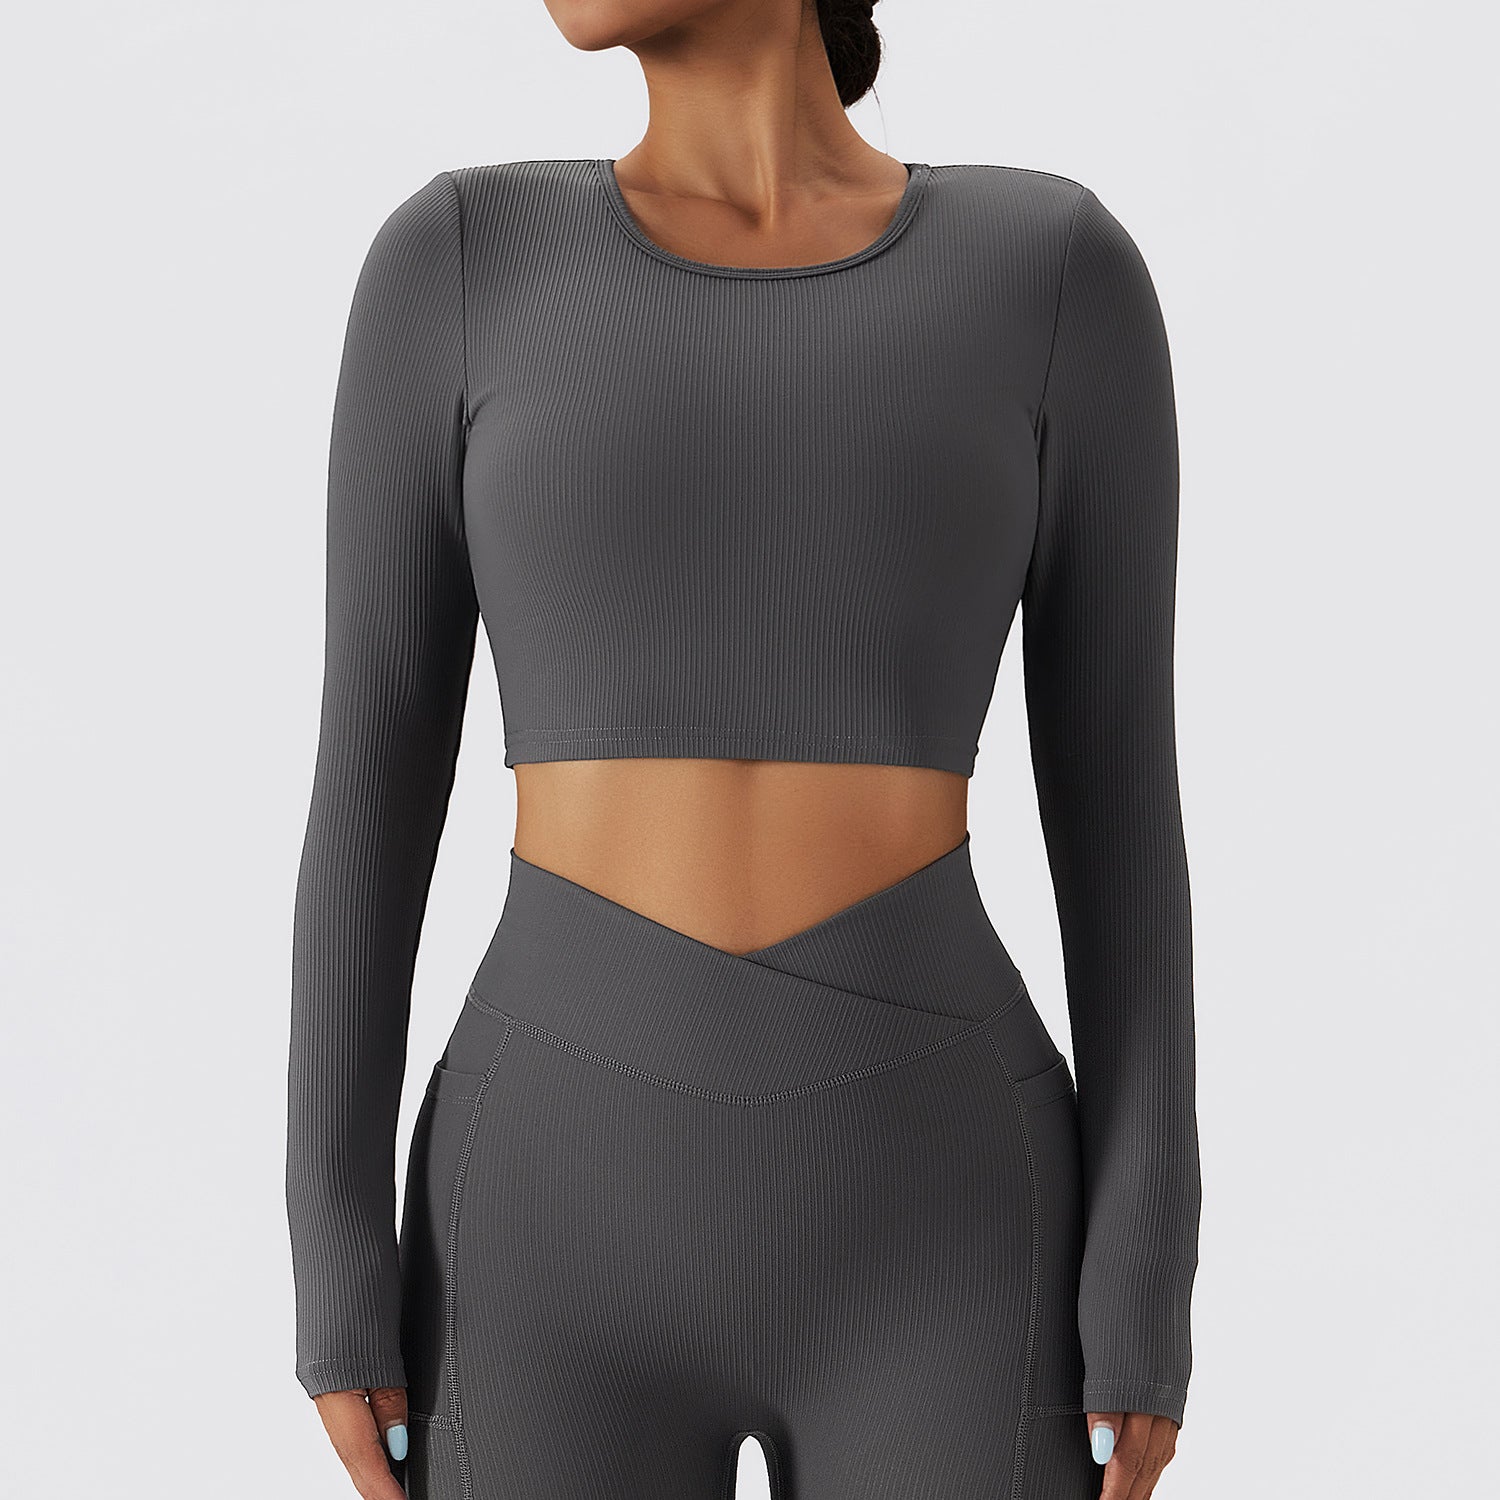 Threaded cutout quick-drying sports top